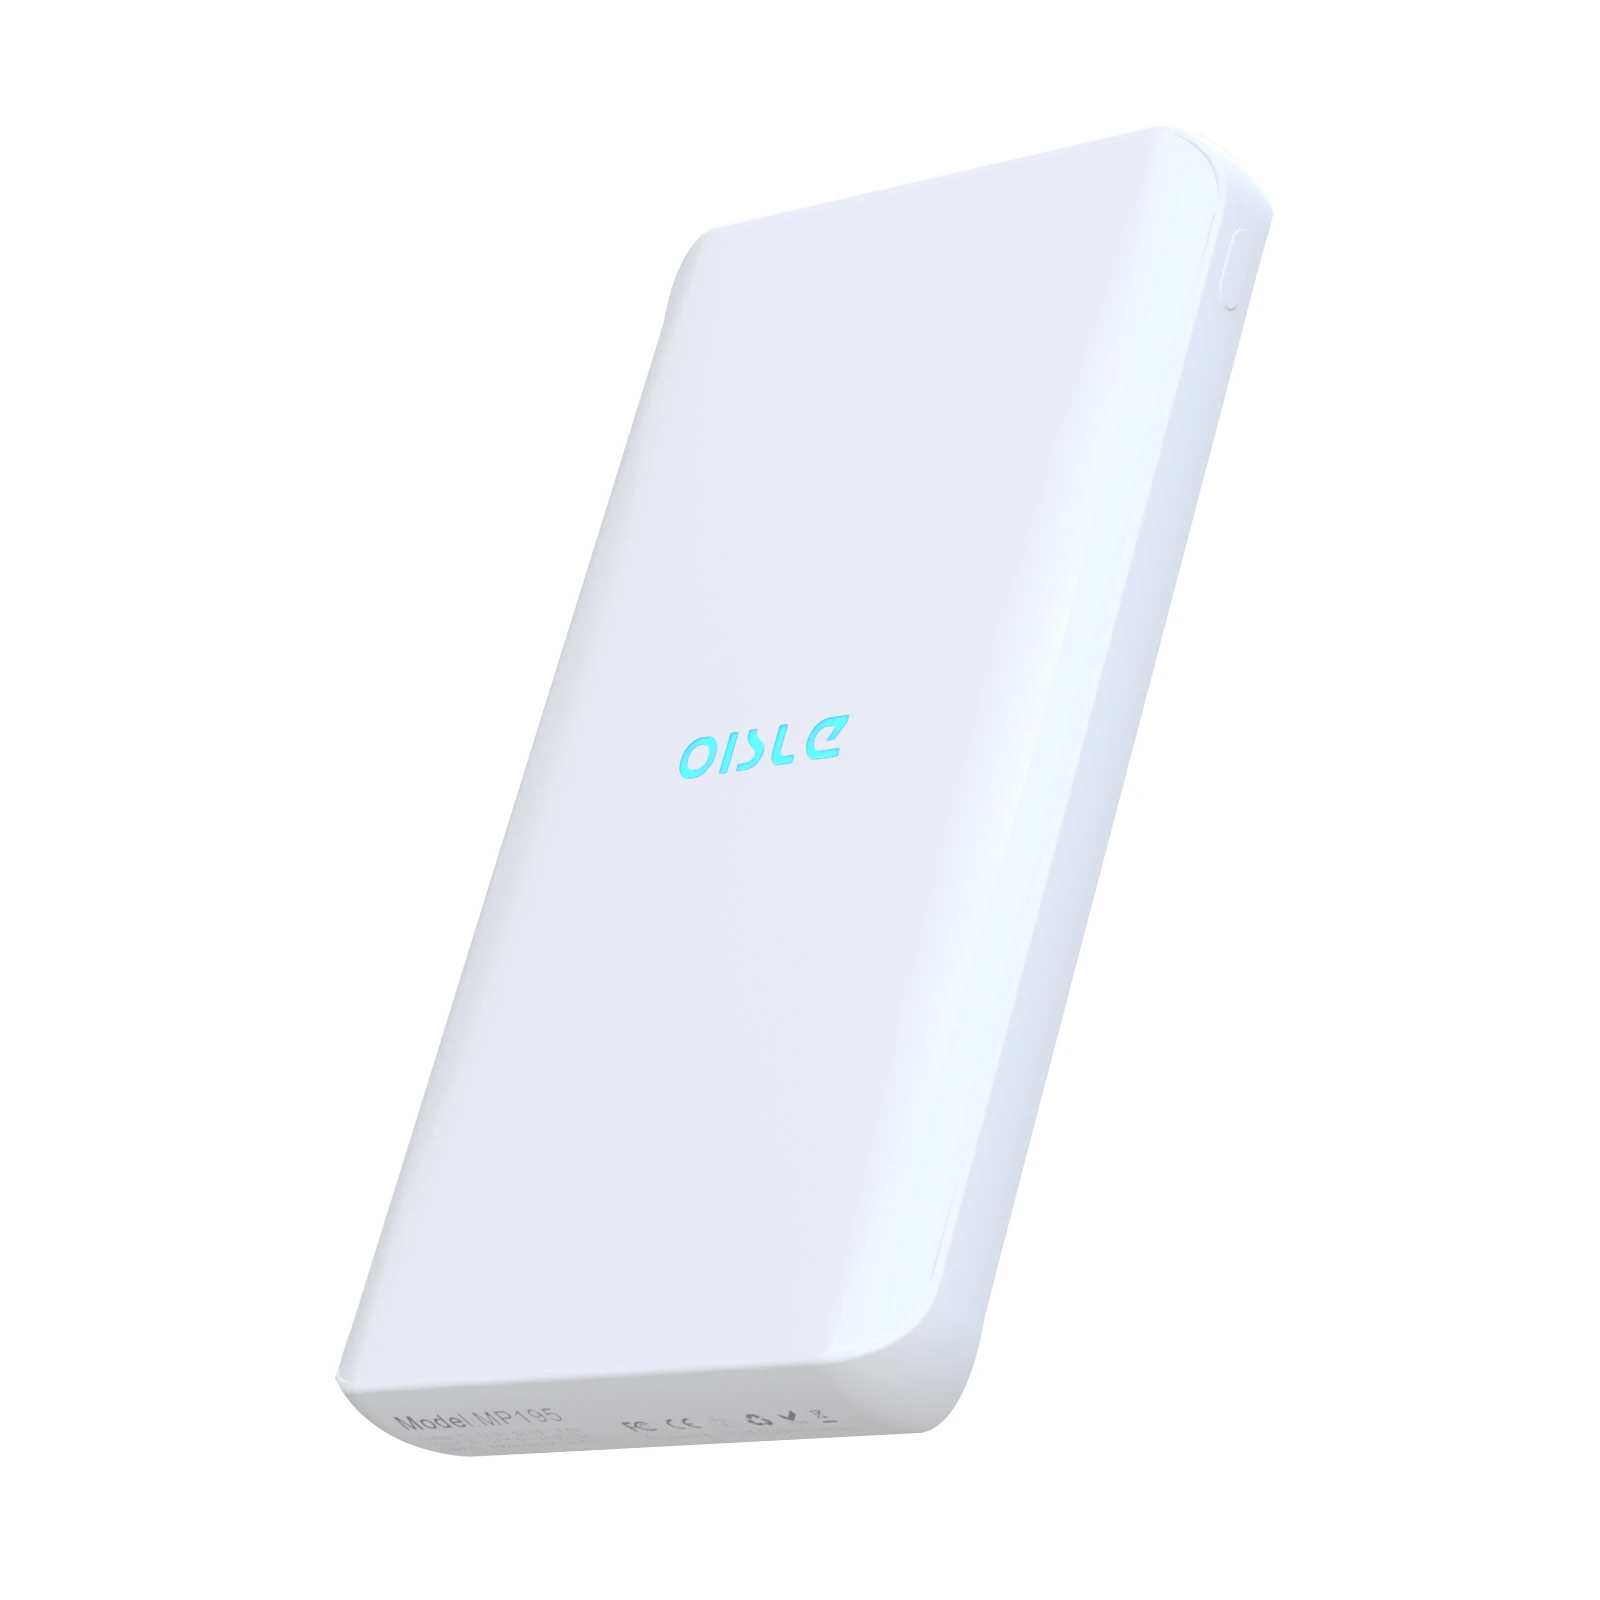 

OISLE ultra slim Mini Portable Magnetic Wireless Charger Power Bank 10000mah Quick Charge Wireless Power Station, White, black, blue, pink, red